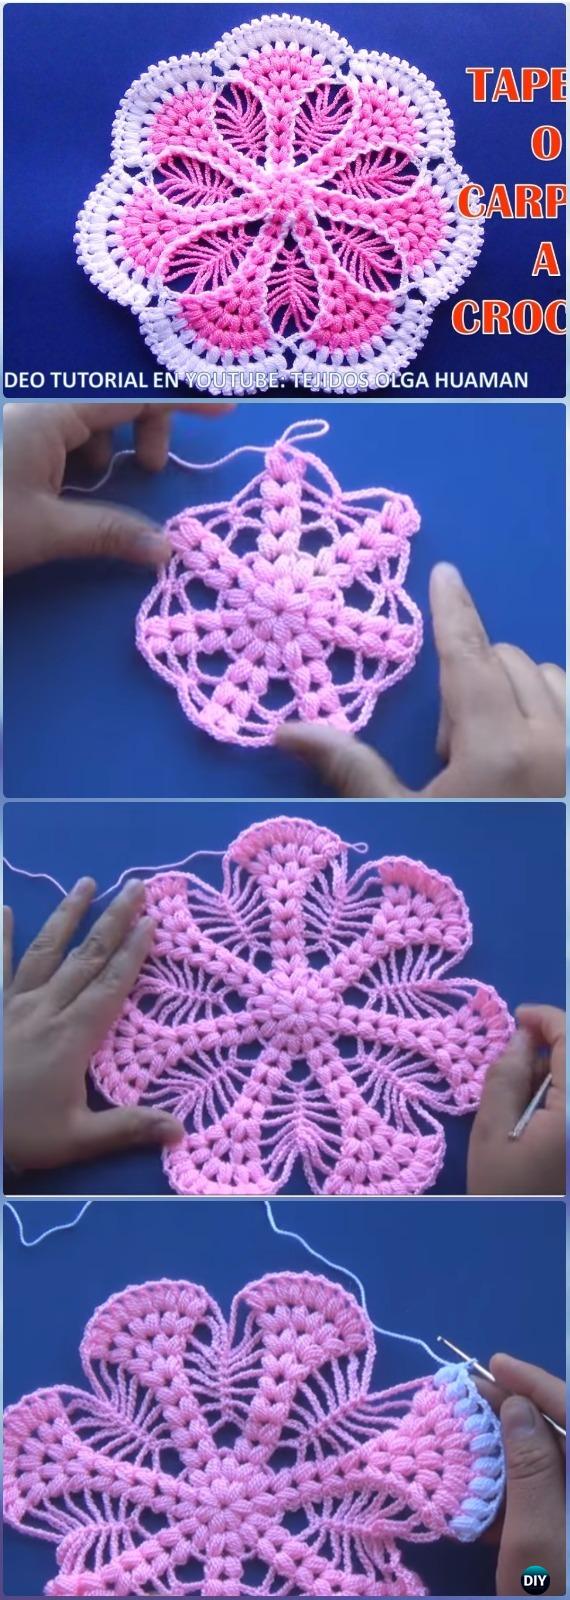 PDF crochet pattern Doily Eden Step by step crochet tutorial ENGRUS Written instruction with full photos and diagrams to each round